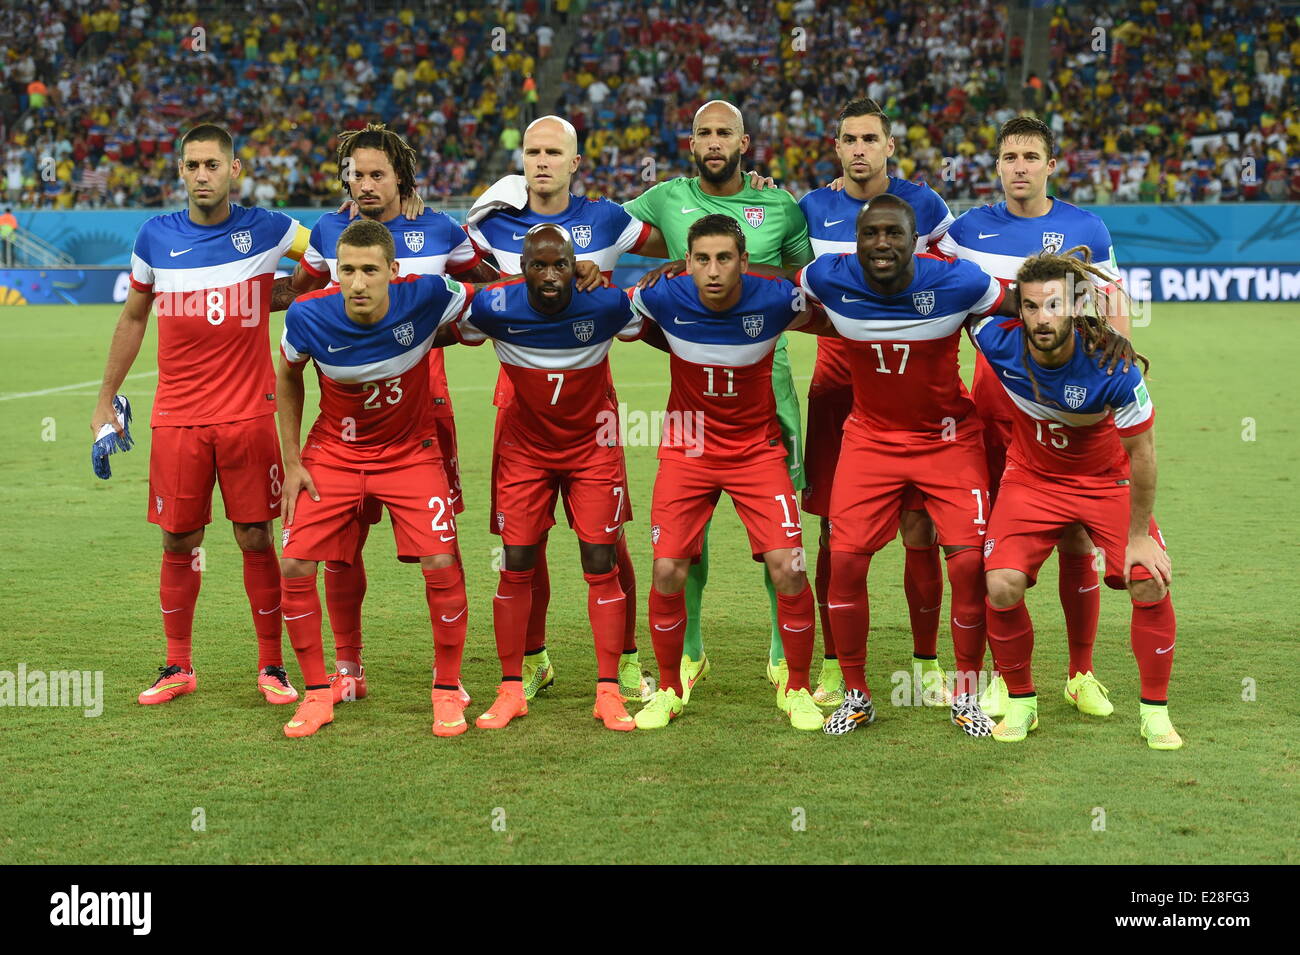 Natal, Brazil. 16th June, 2014. Team of USA poses for a group photo (back L-R) Clint Dempsey, Jermaine Jones, Michael Bradley, goalkeeper Tim Howard, Geoff Cameron, Matt Besler (front L-R) Fabian Johnson, DaMarcus Beasley, Alejandro BEdoya, Jozy Altidore, Kyle Beckerman prior to the FIFA World Cup 2014 group G preliminary round match between Ghana and the USA at the Estadio Arena das Dunas Stadium in Natal, Brazil, 16 June 2014. Credit:  dpa picture alliance/Alamy Live News Stock Photo